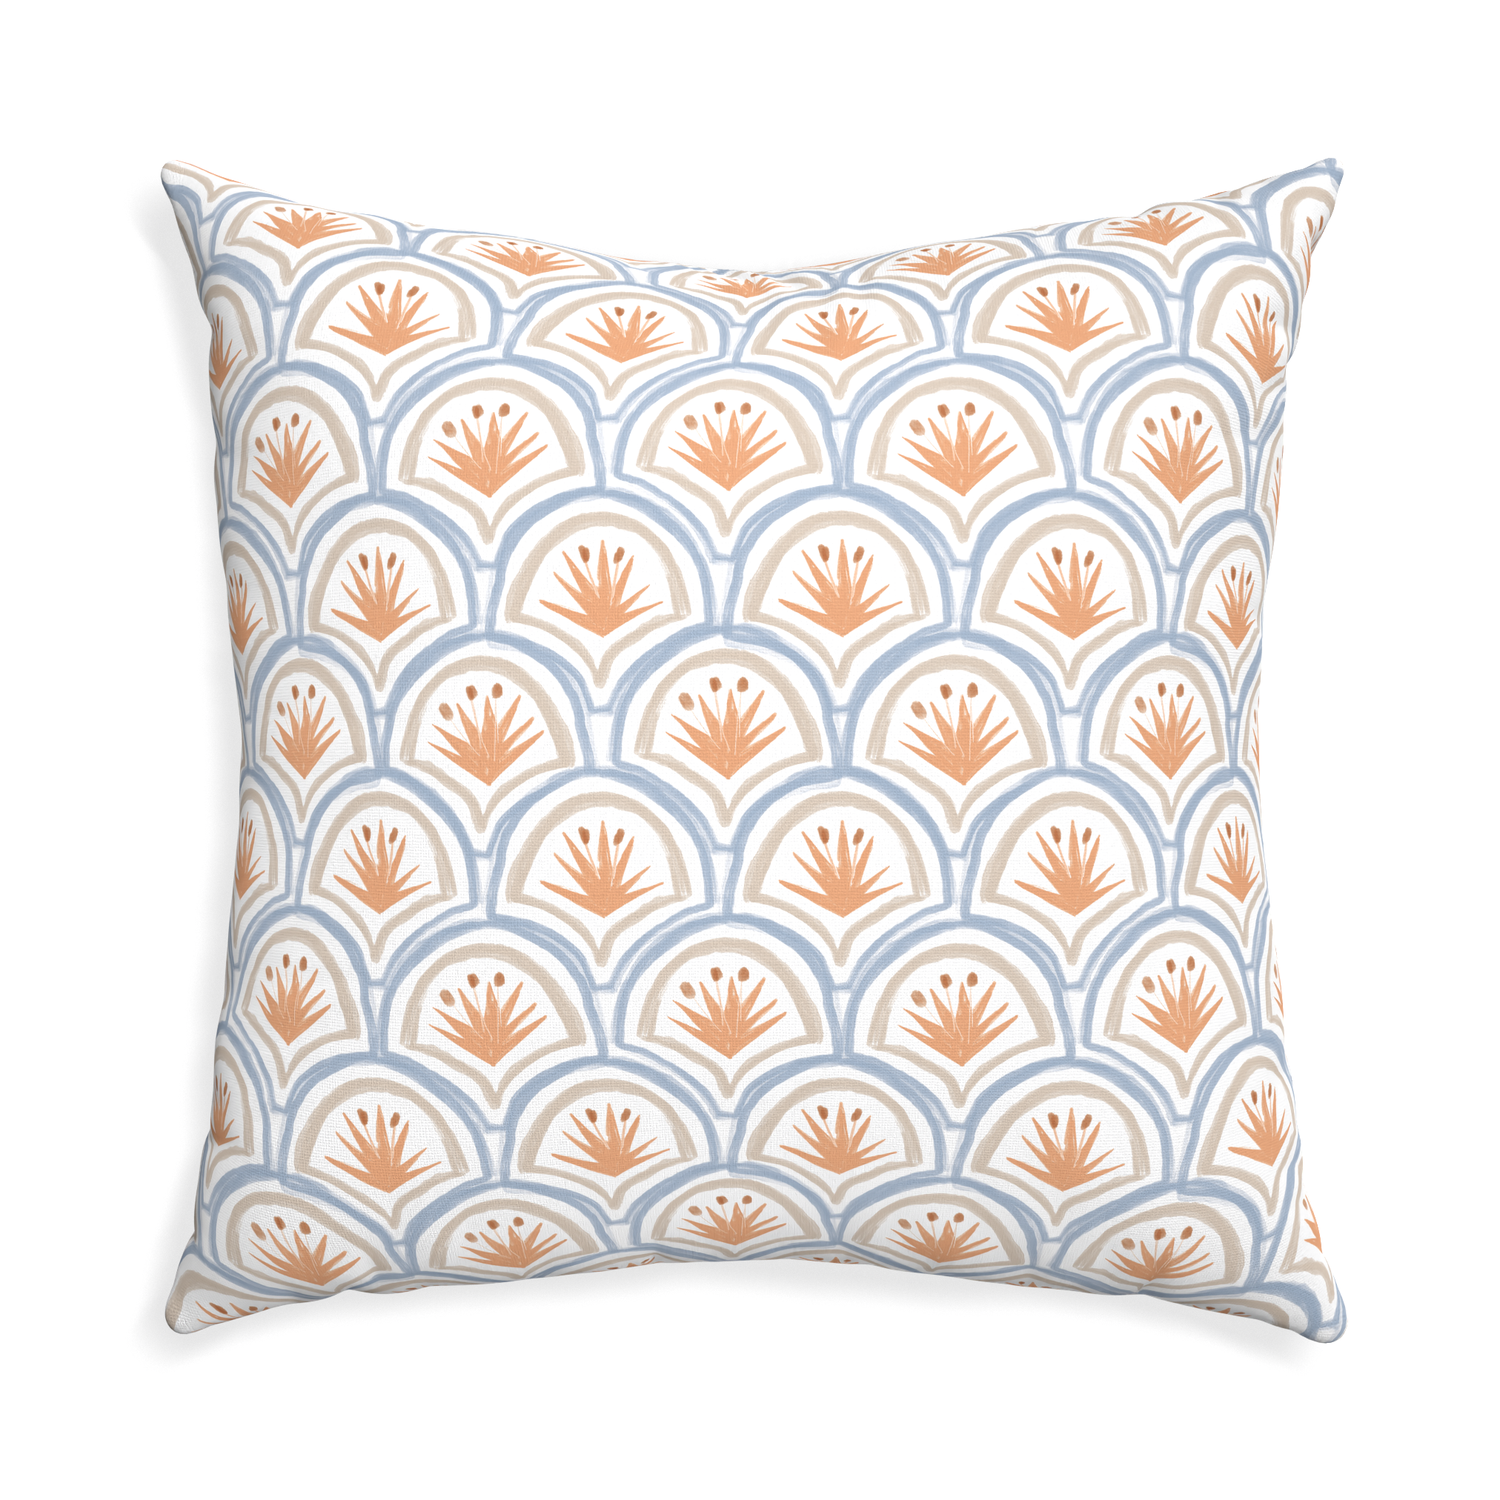 Euro-sham thatcher apricot custom pillow with none on white background